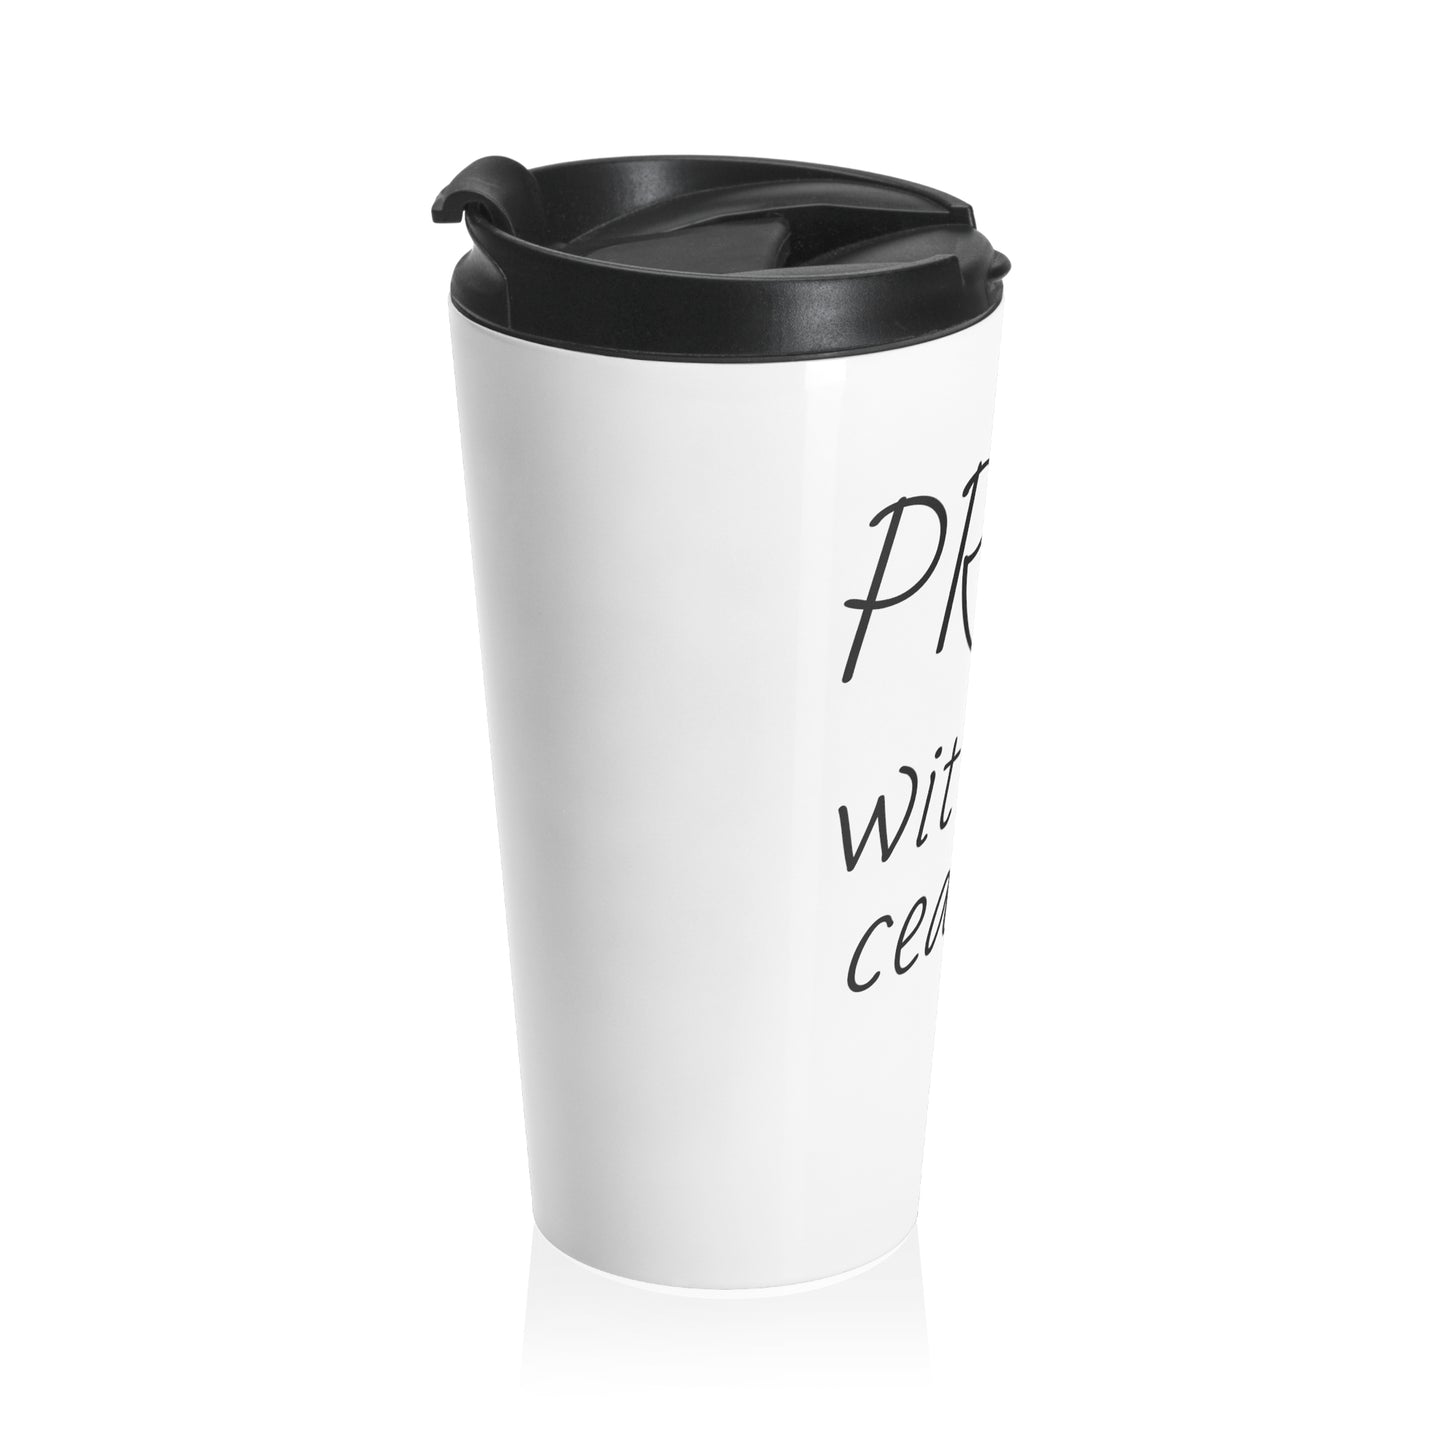 Pray Without Ceasing Stainless Steel Travel Mug 15 oz